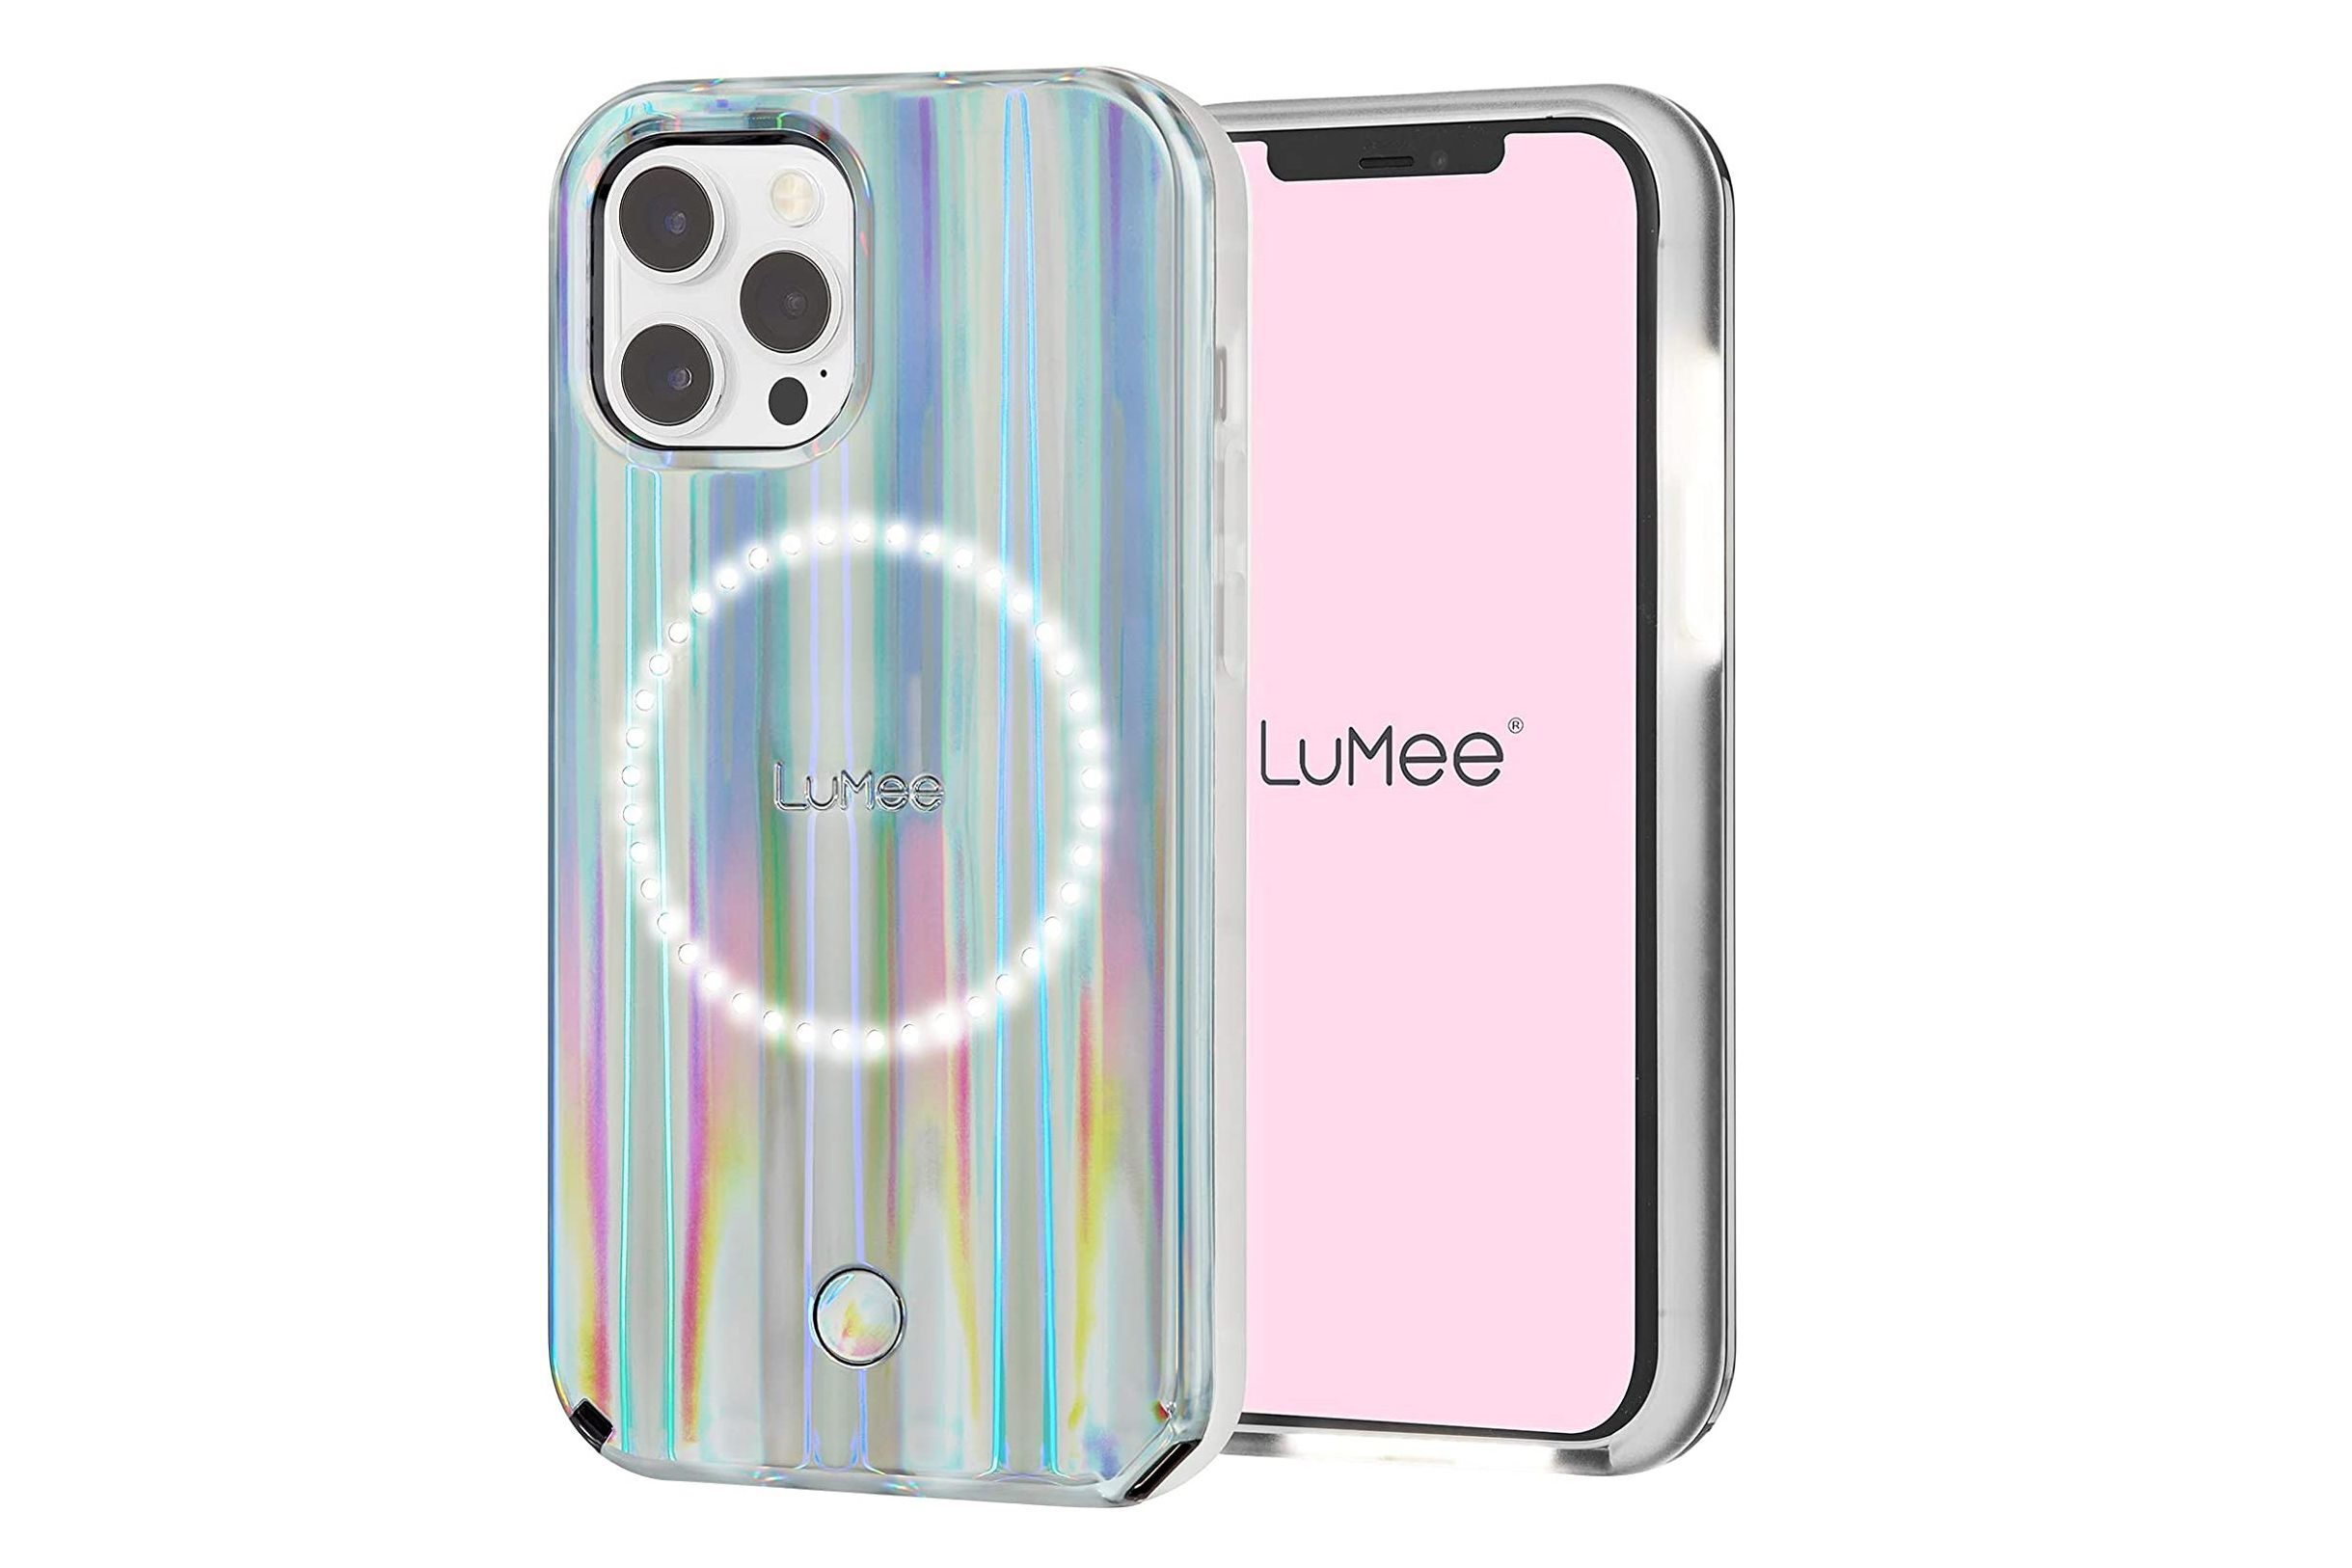 LuMee Halo iPhone 12 Pro Max case - The best iPhone 12 Pro Max cases in 2022 - updated October